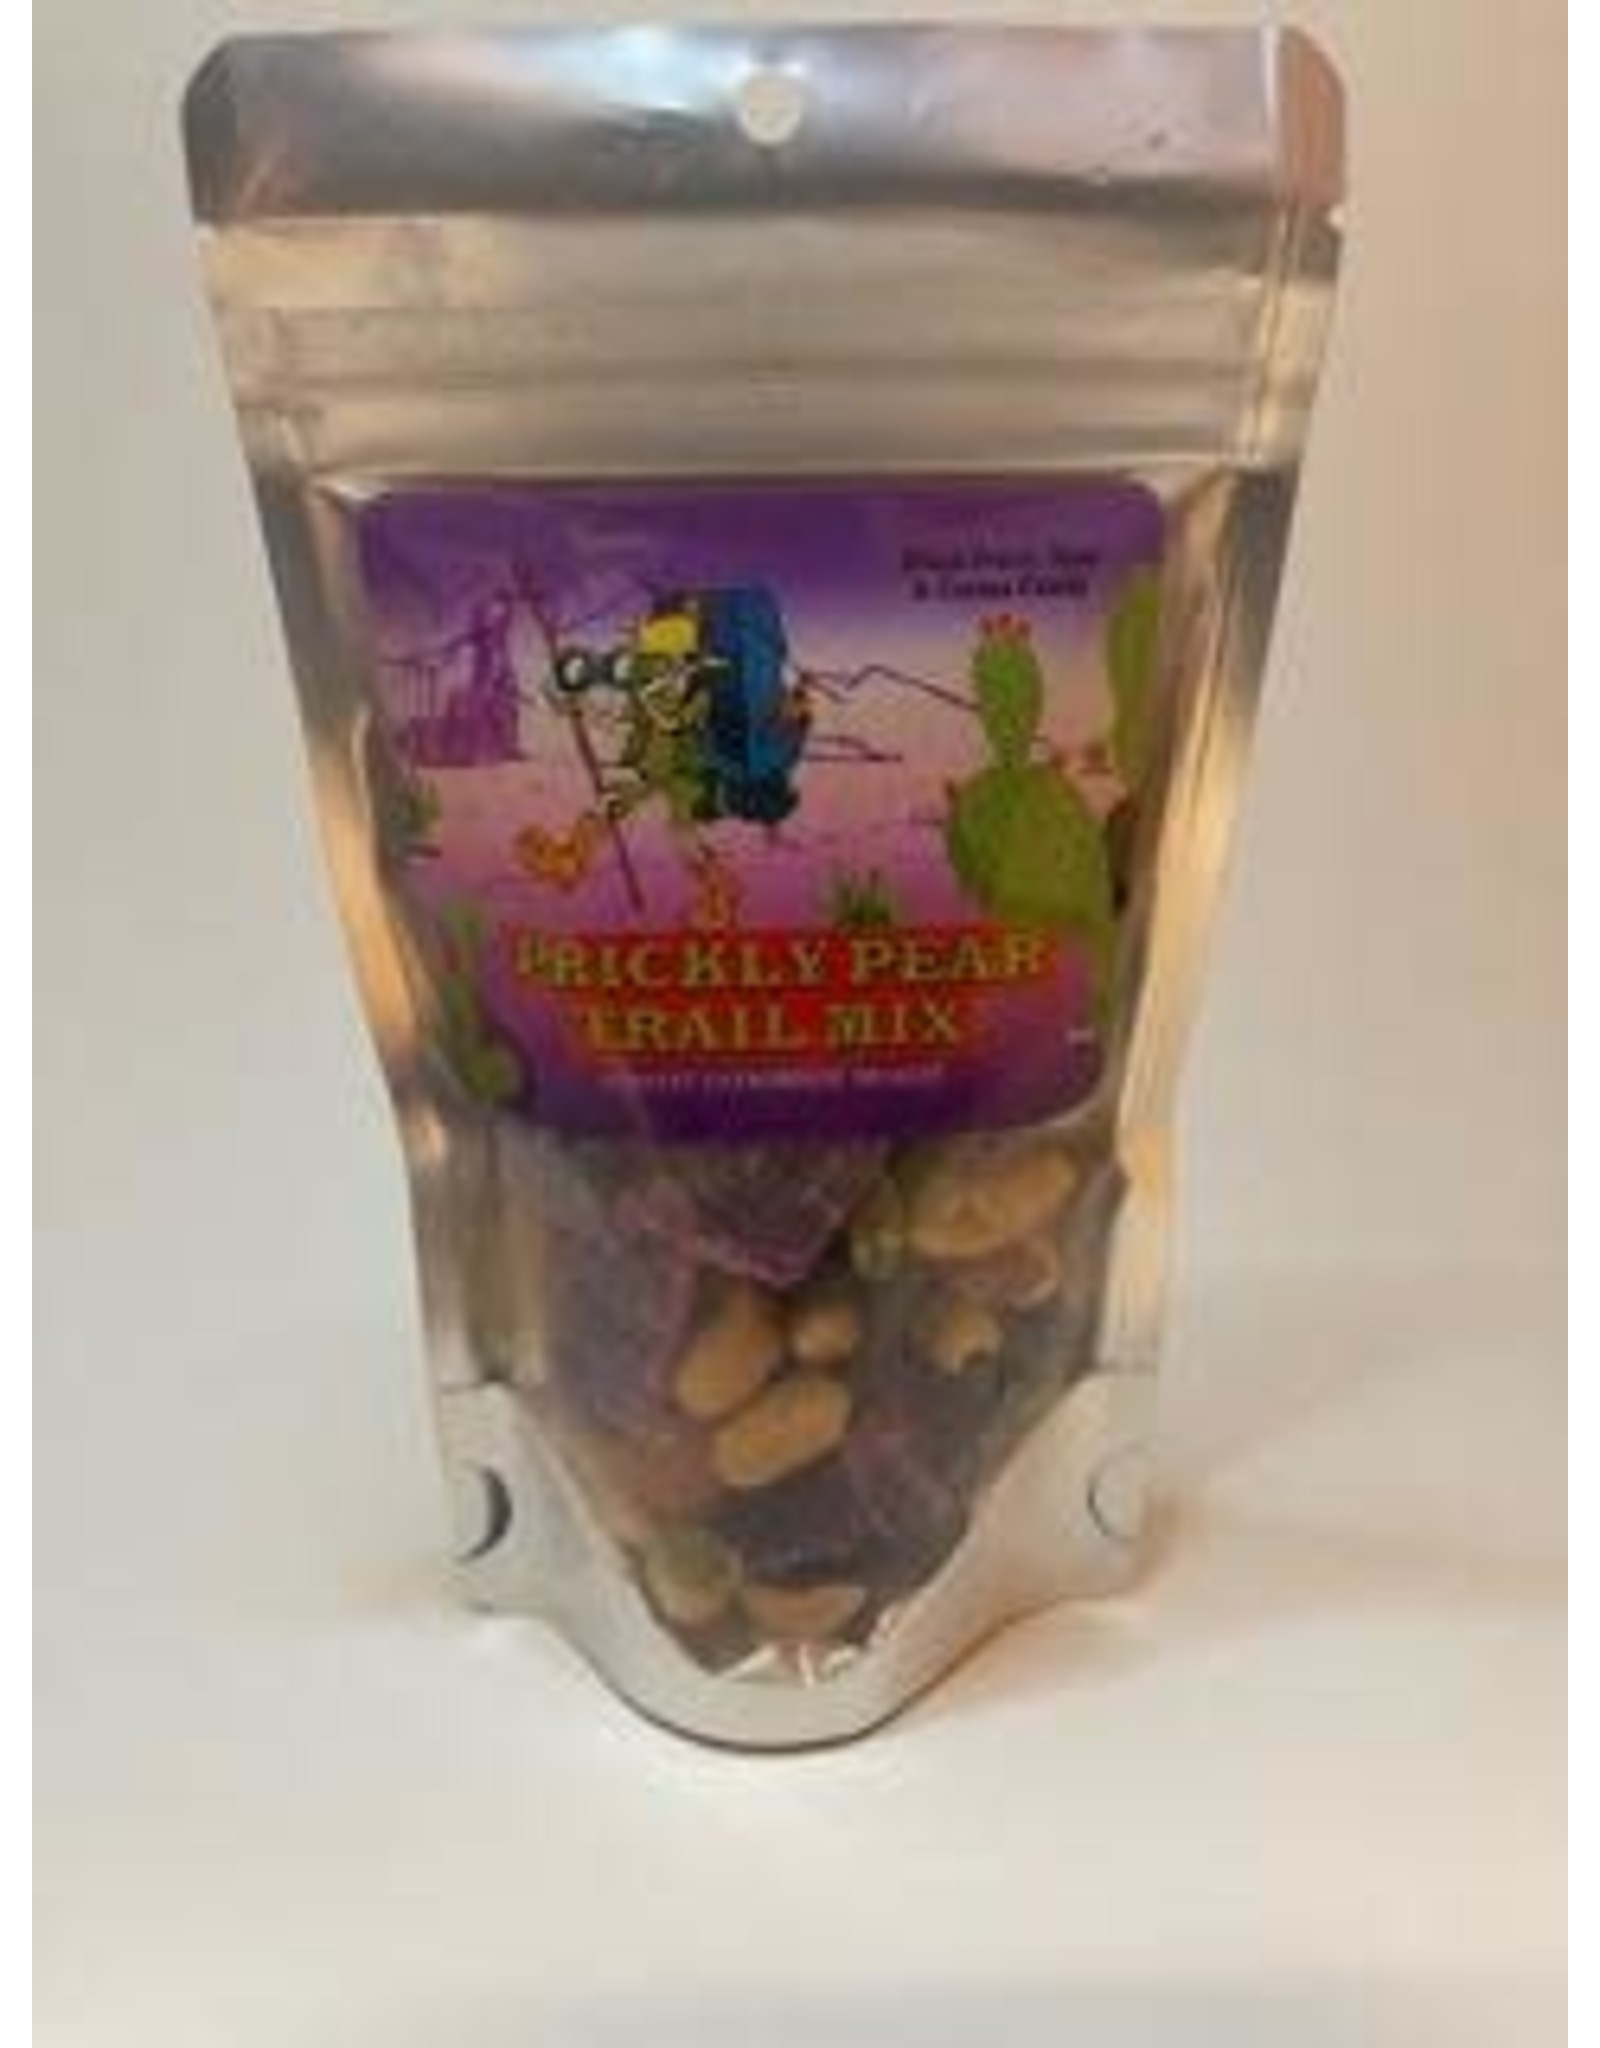 Prickly Pear Trail Mix